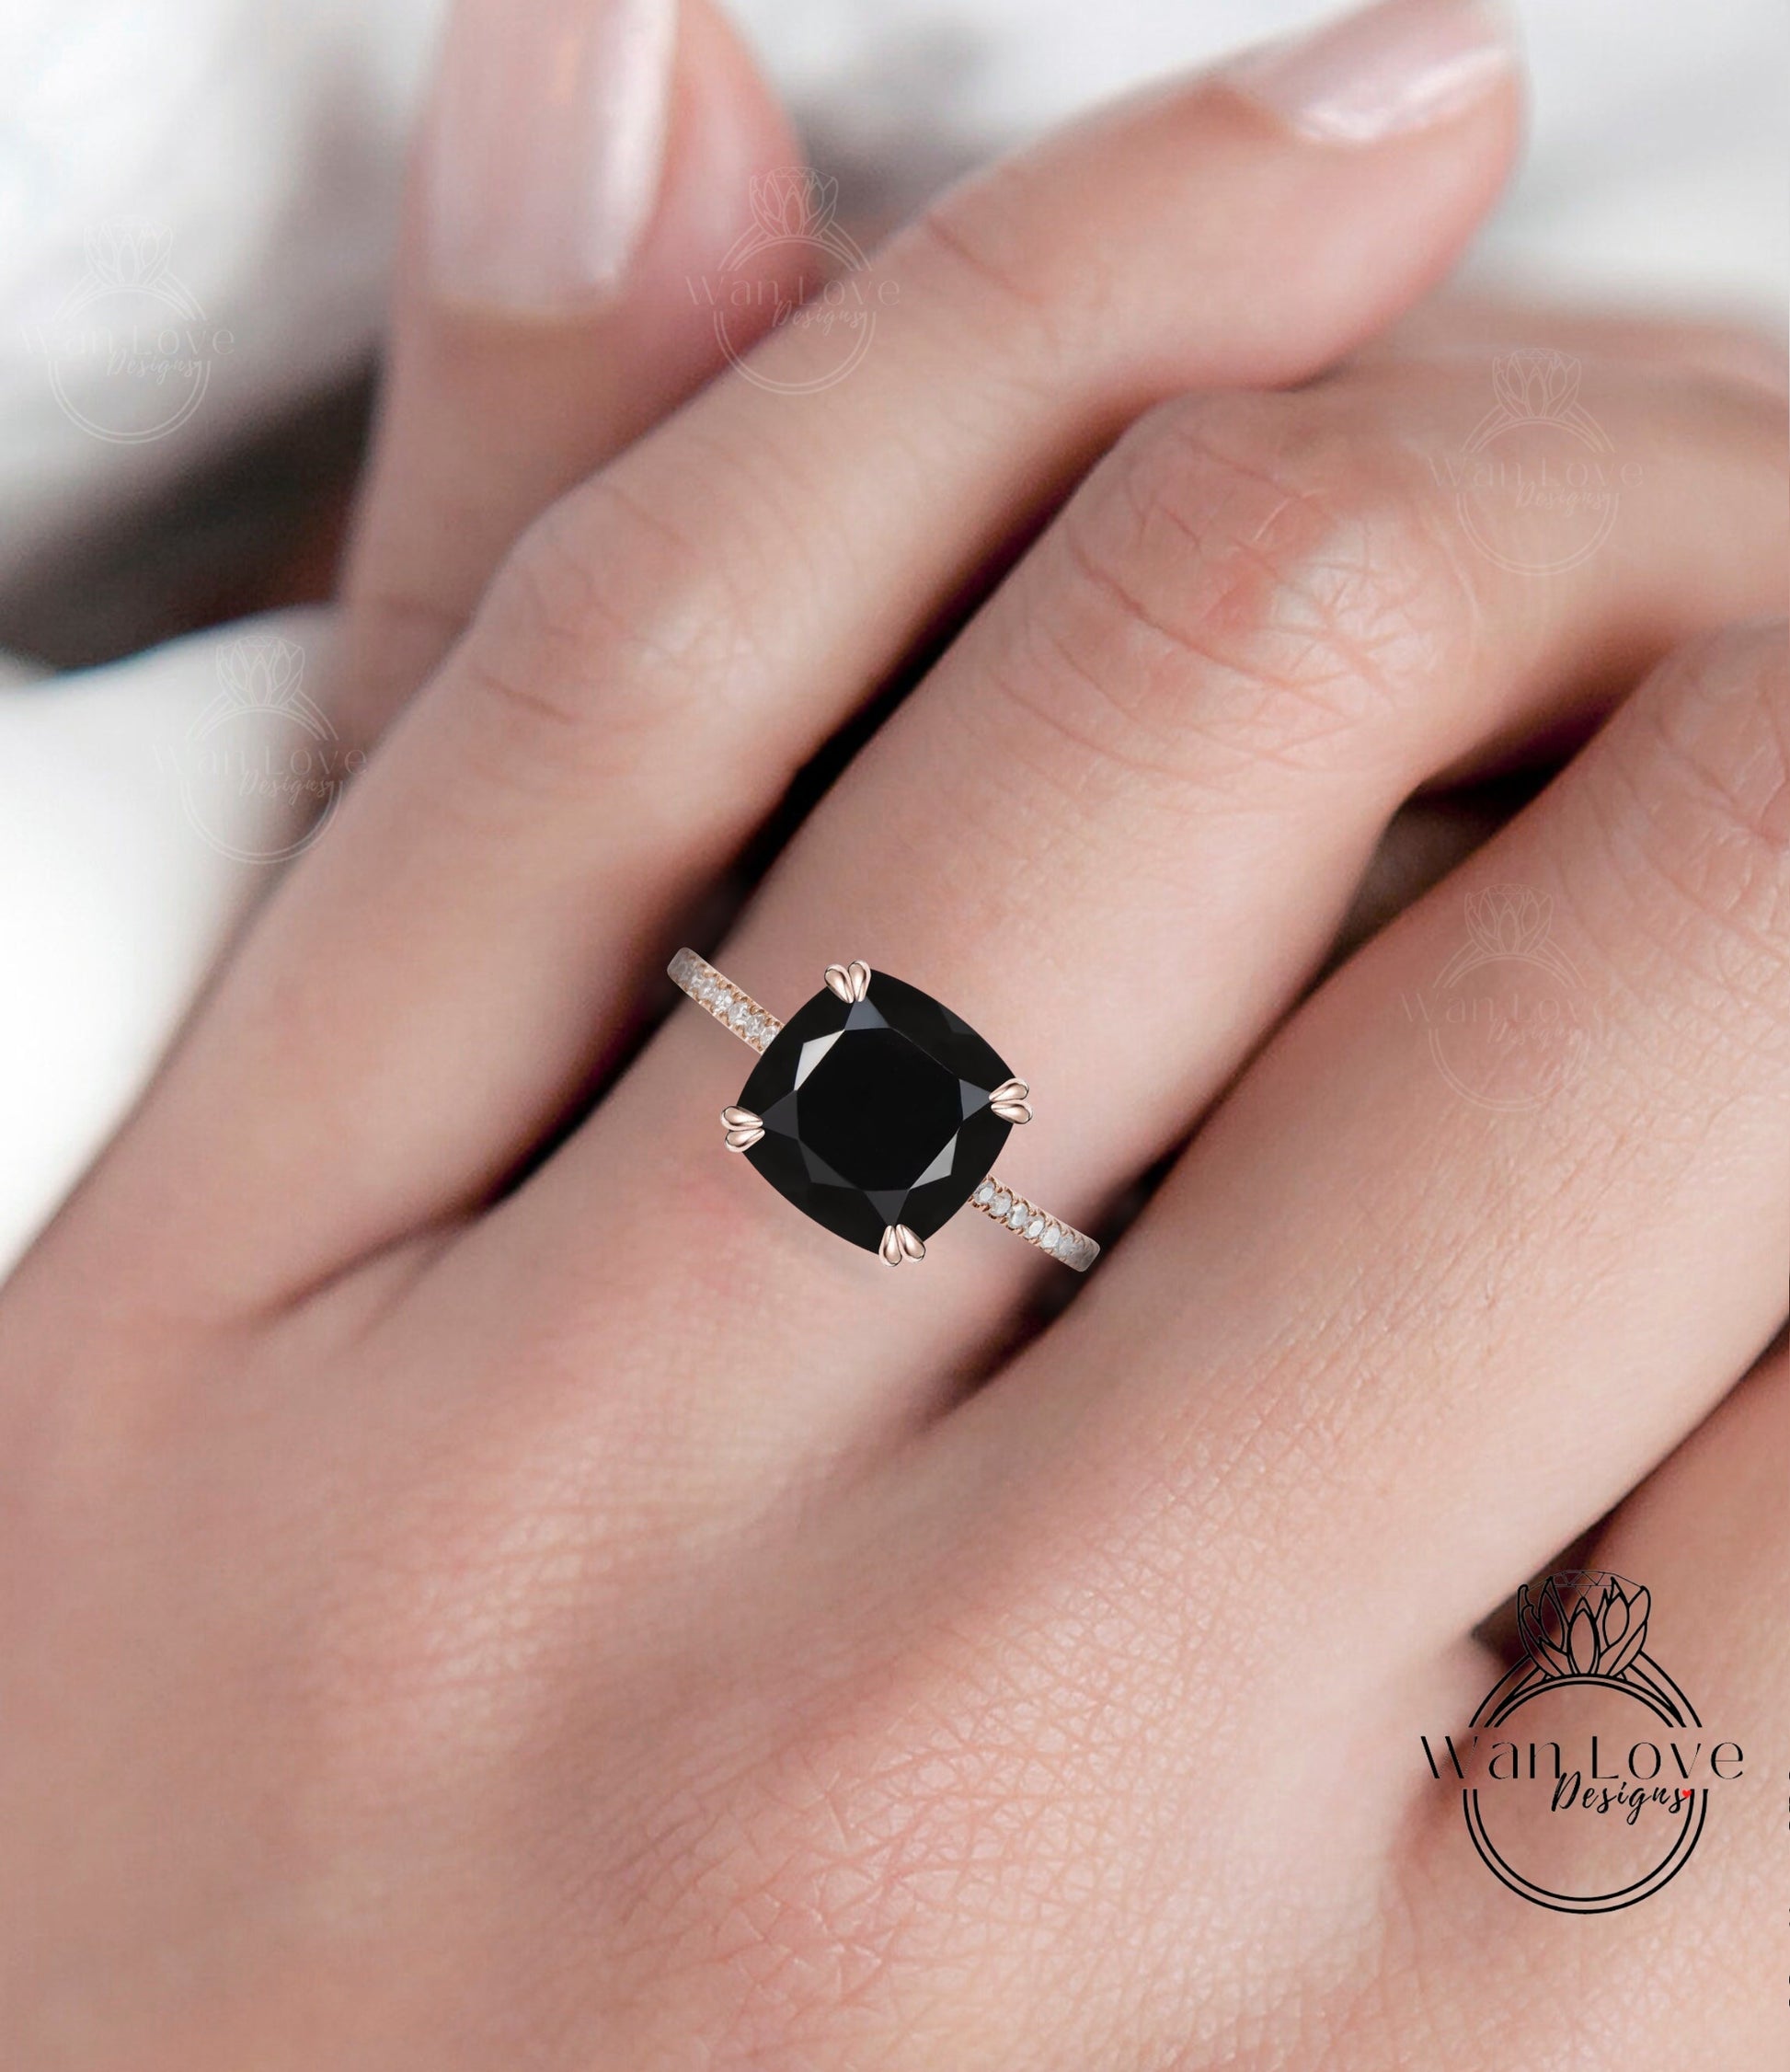 Black Spinel & Diamond Cushion cut Engagement ring Vintage Rose Gold ring Unique Bridal Art deco cushion Solitaire Anniversary Promise ring Wan Love Designs